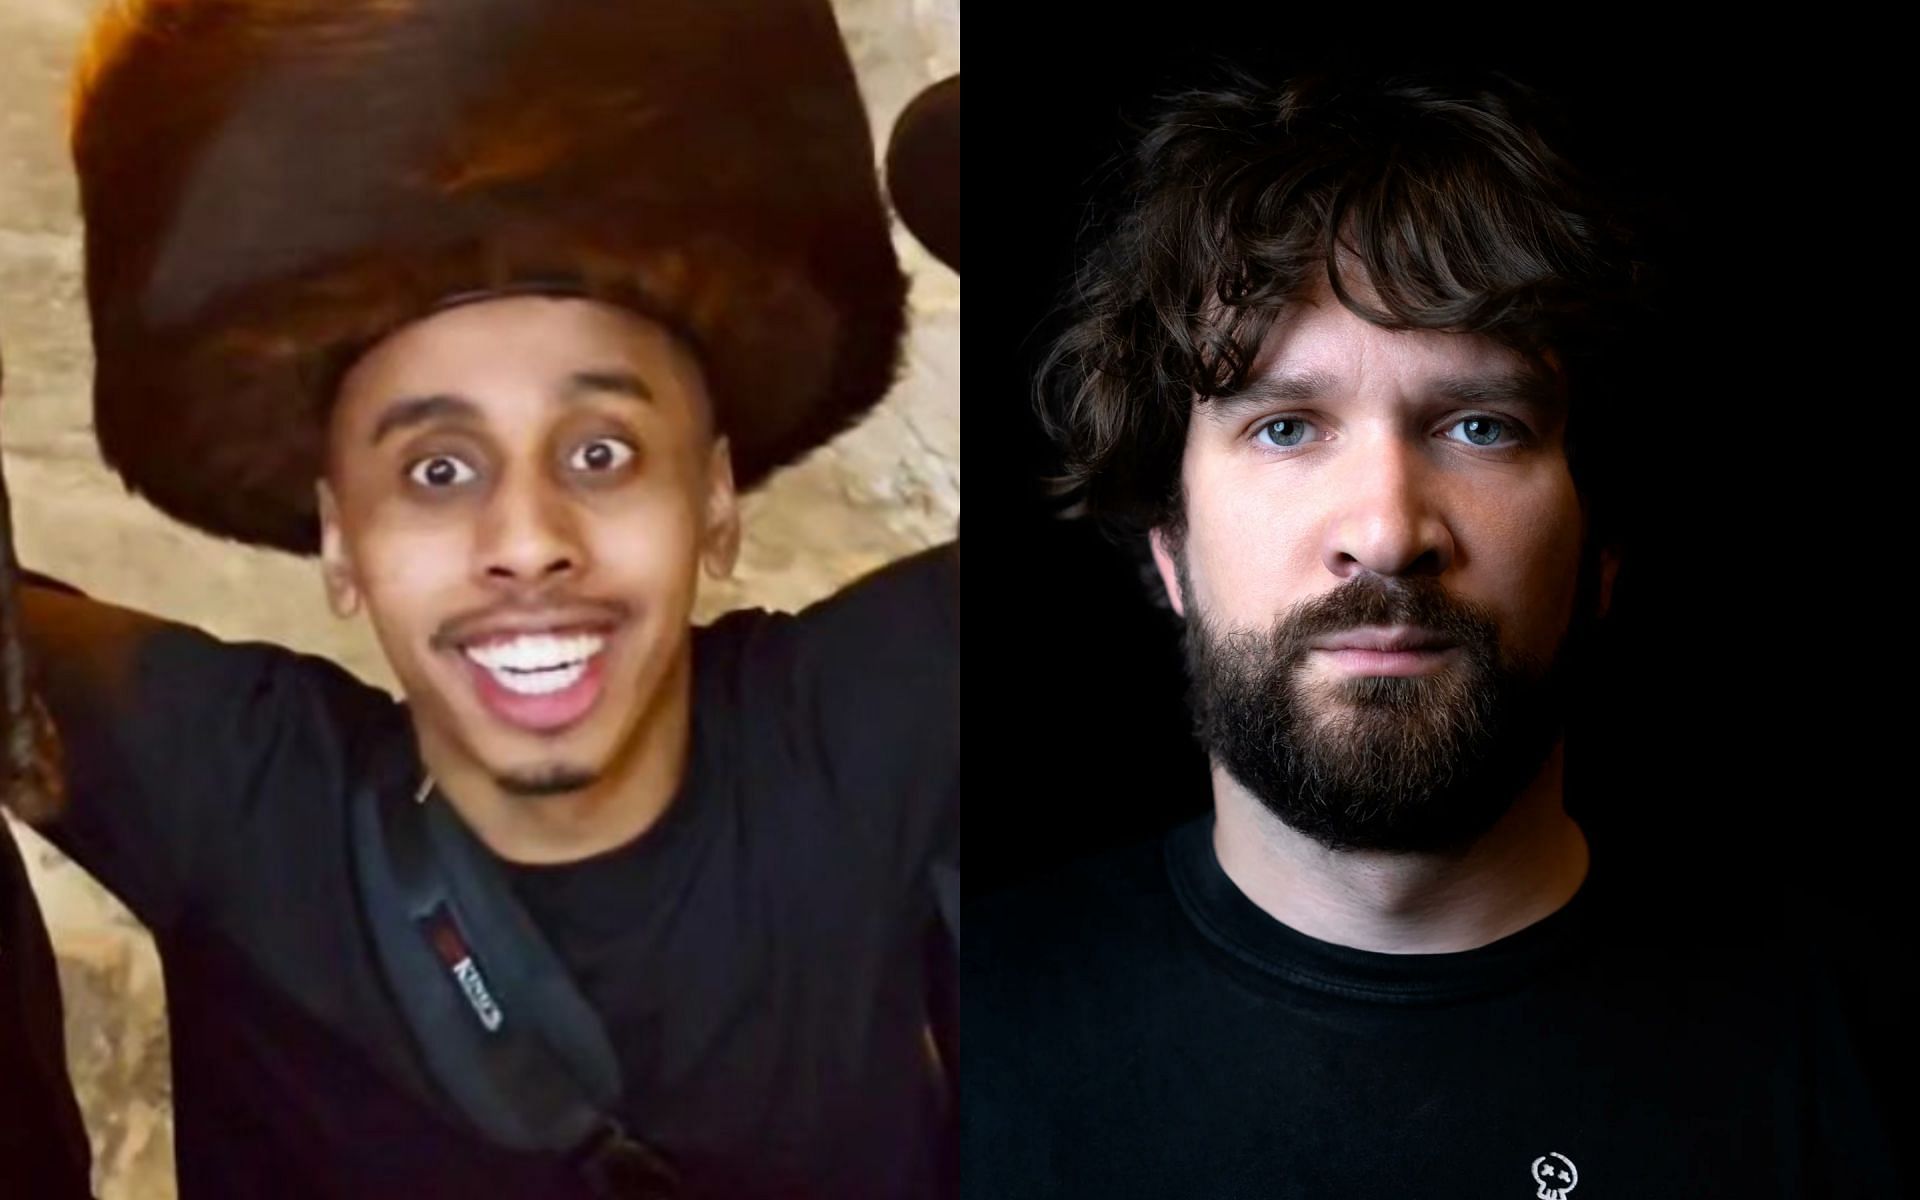 Destiny goes off at Johnny Somali after controversial streamer calls him &quot;unprofessional&quot; (Image via Johnny Somali/Instagram and @TheOmniLiberal/X)